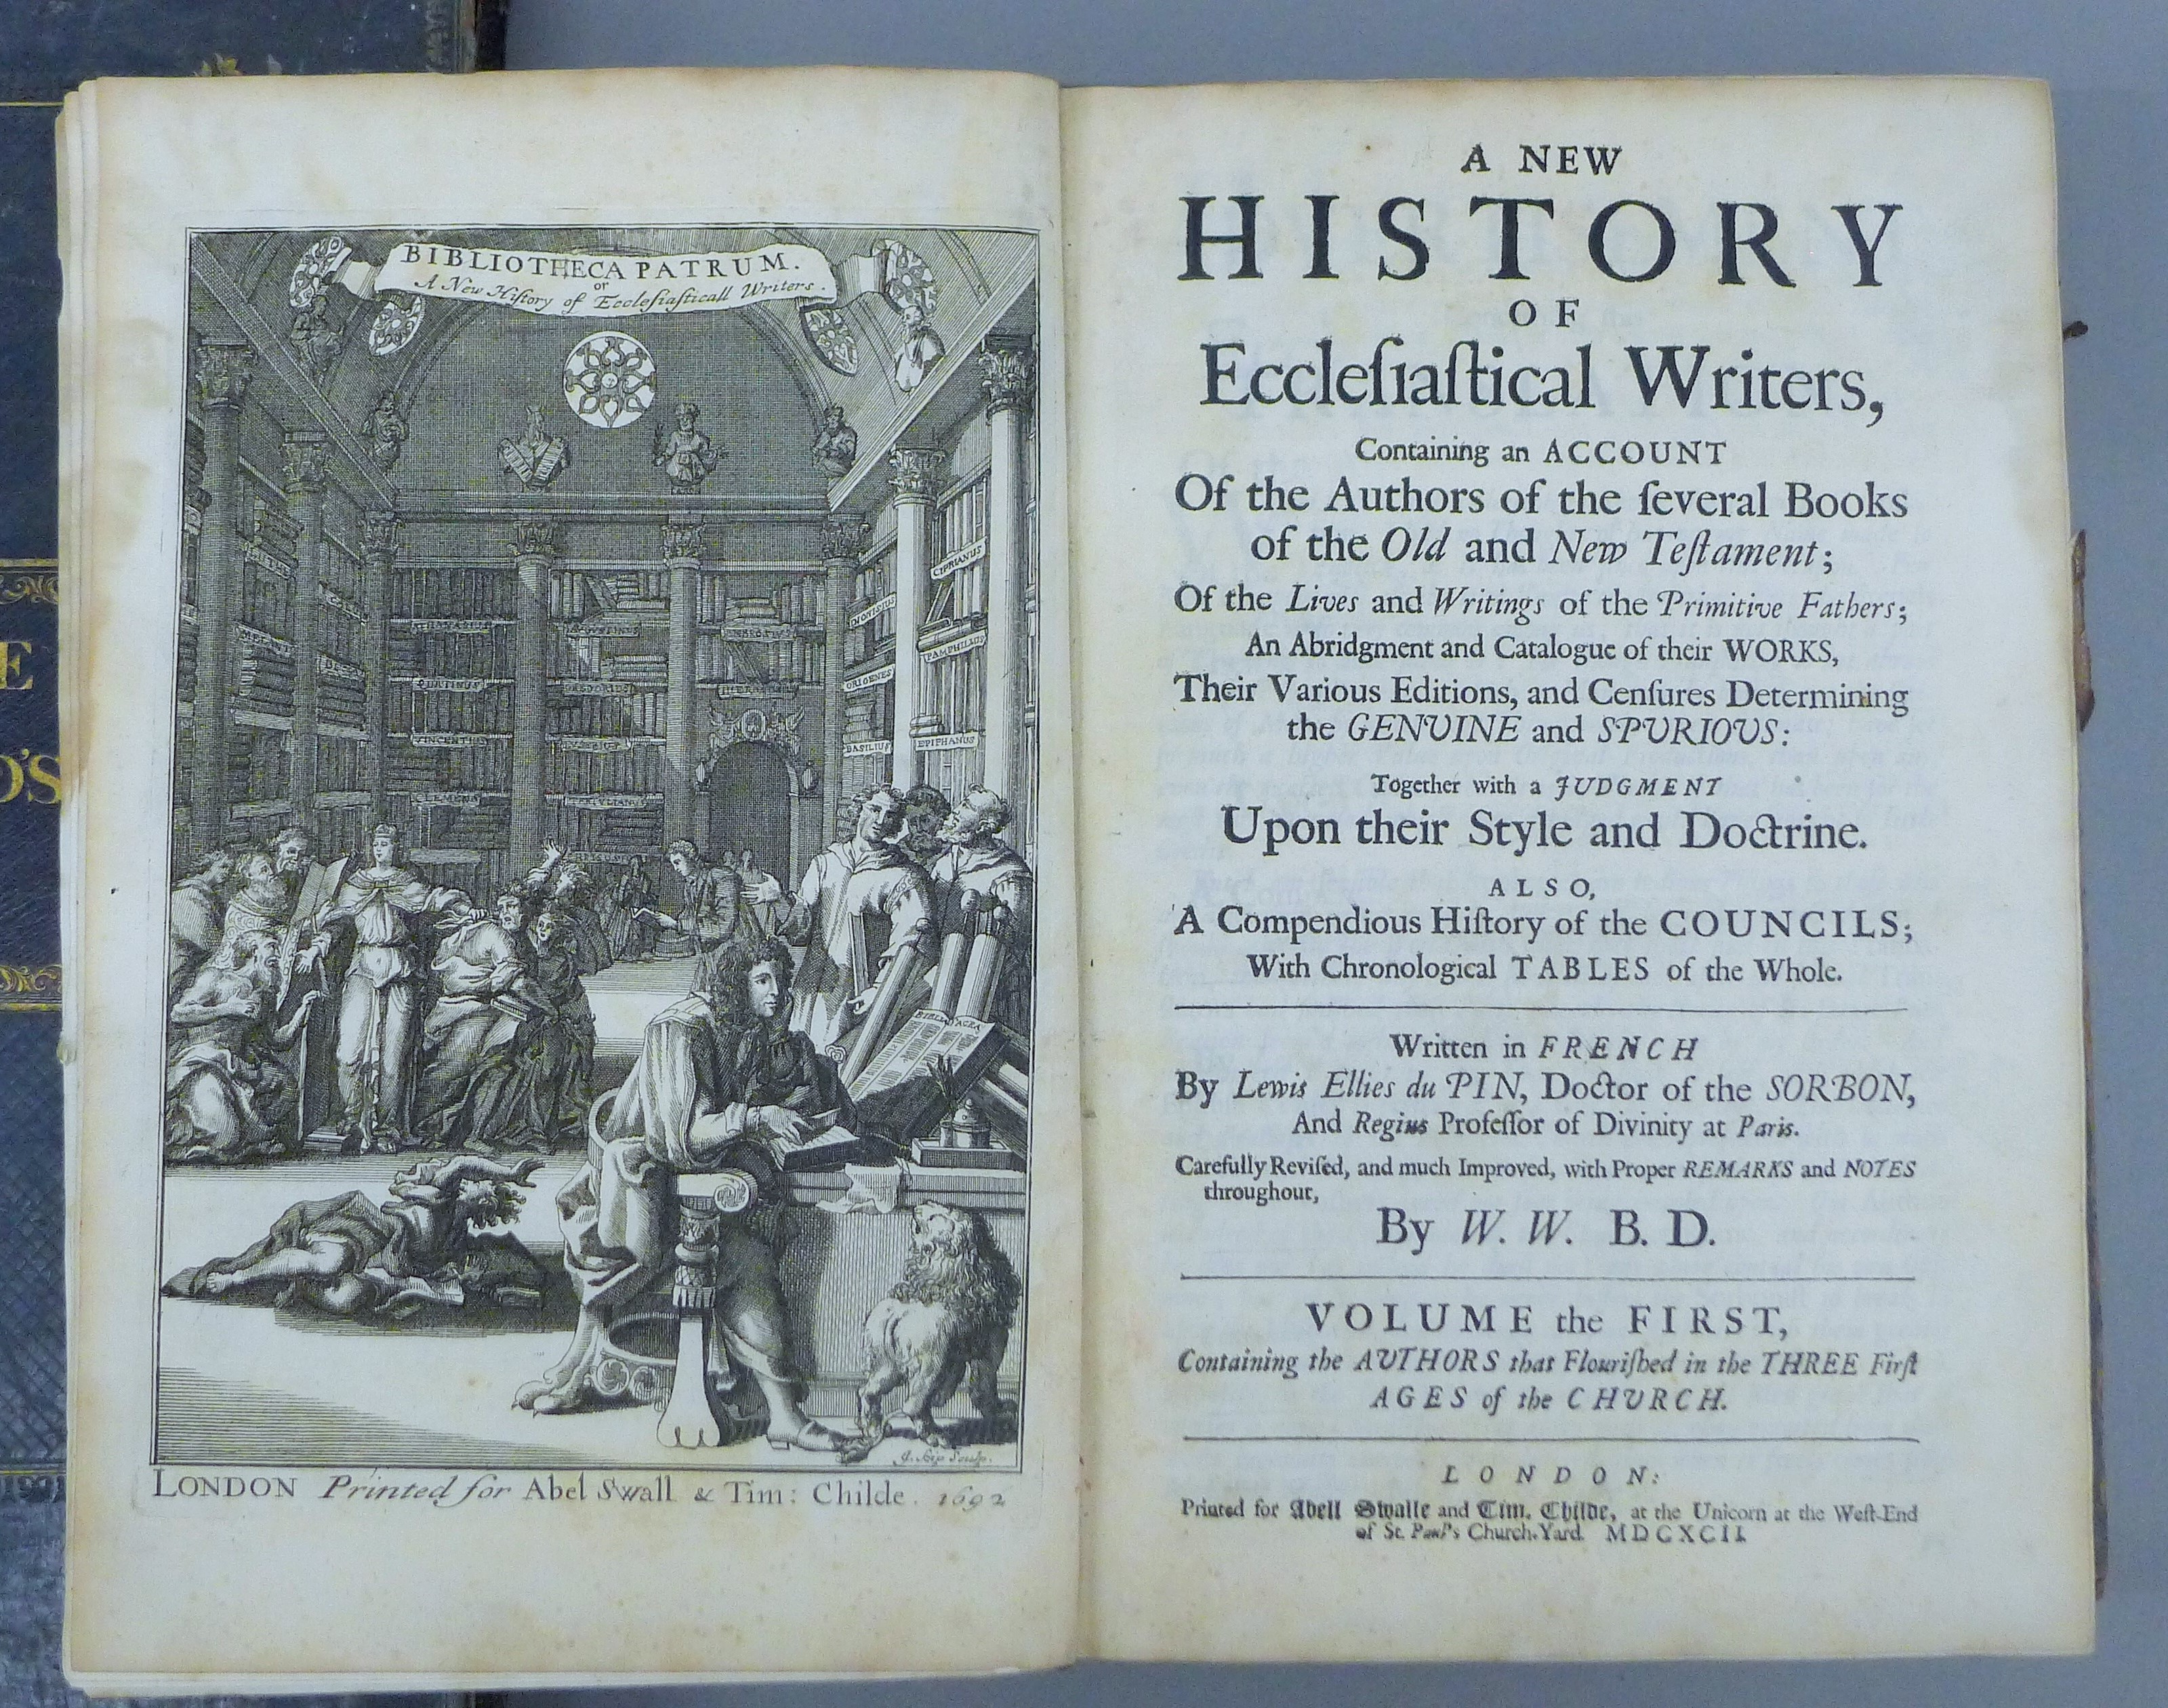 A New History of Ecclesiastical Writers Containing an account of the Authors of several Books of - Image 3 of 3